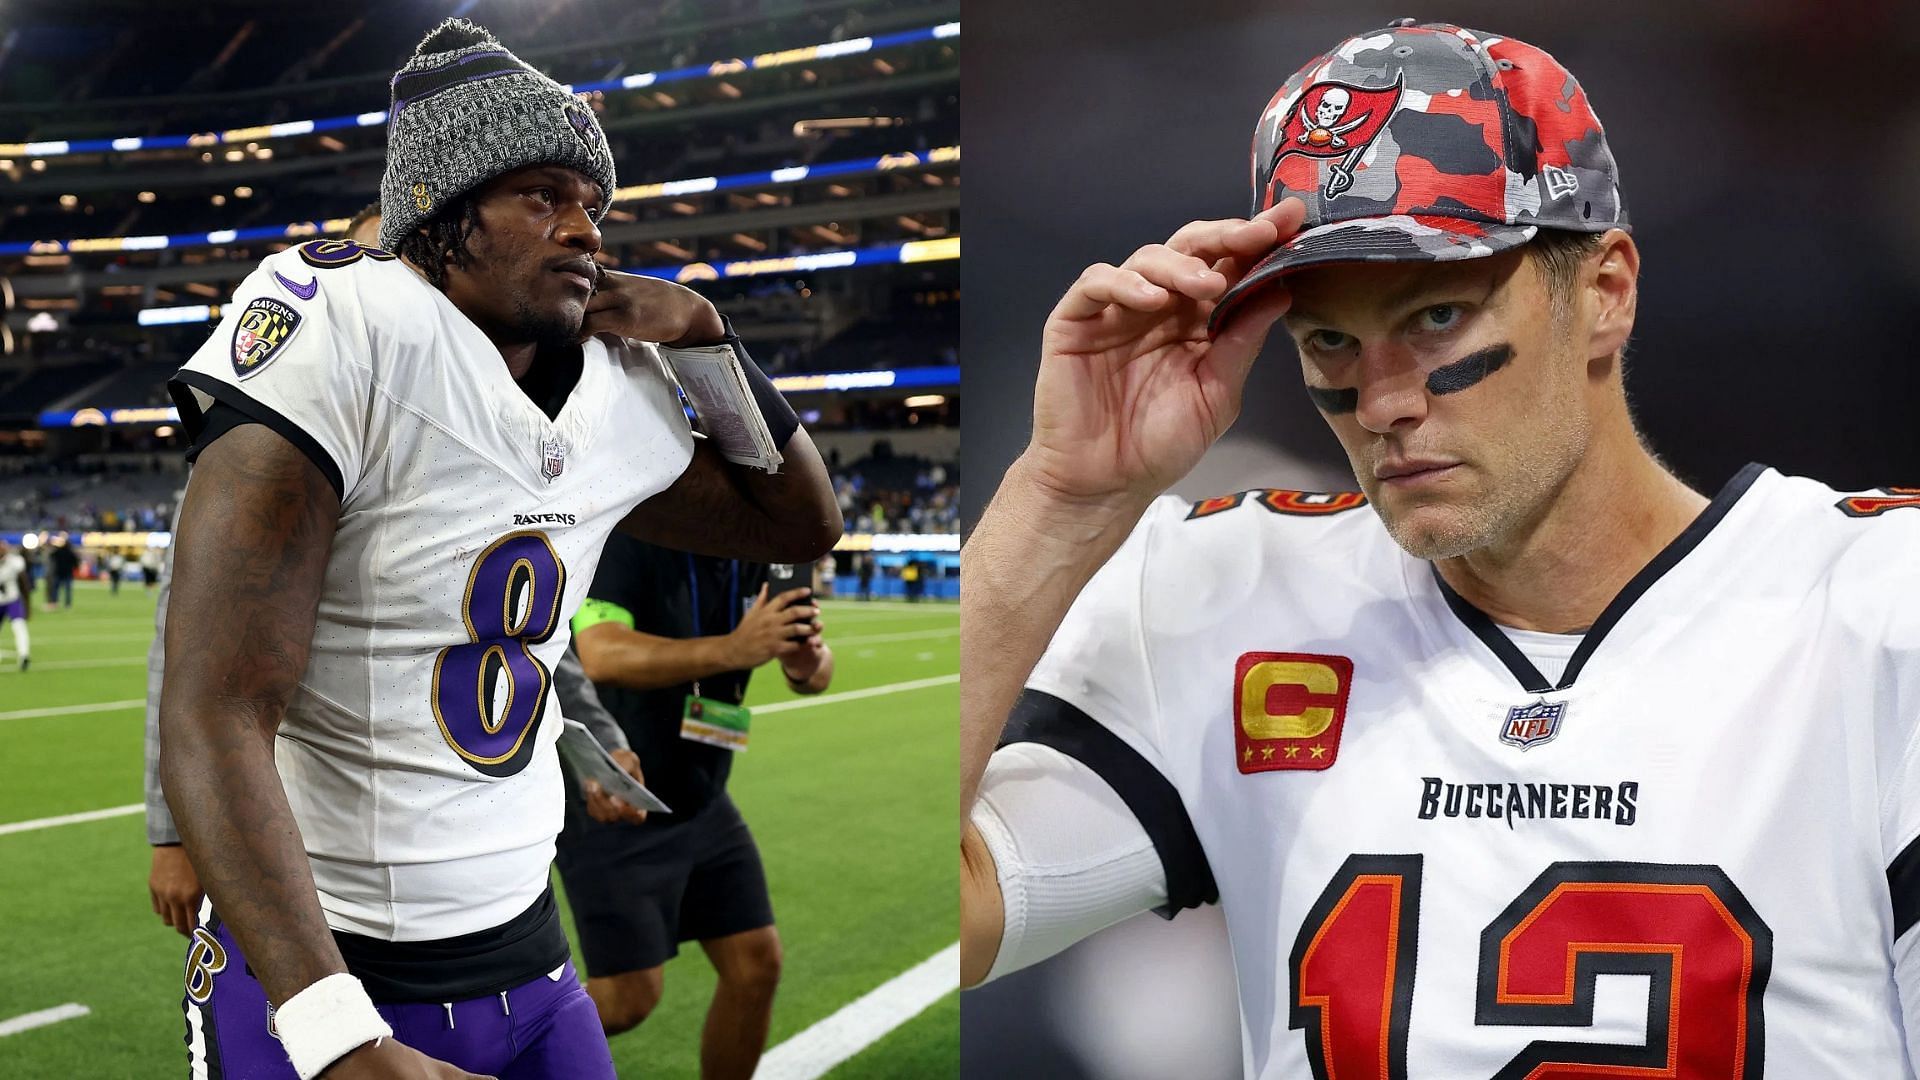 Analyst: Lamar Jackson must tap into his inner Tom Brady to win a Super Bowl